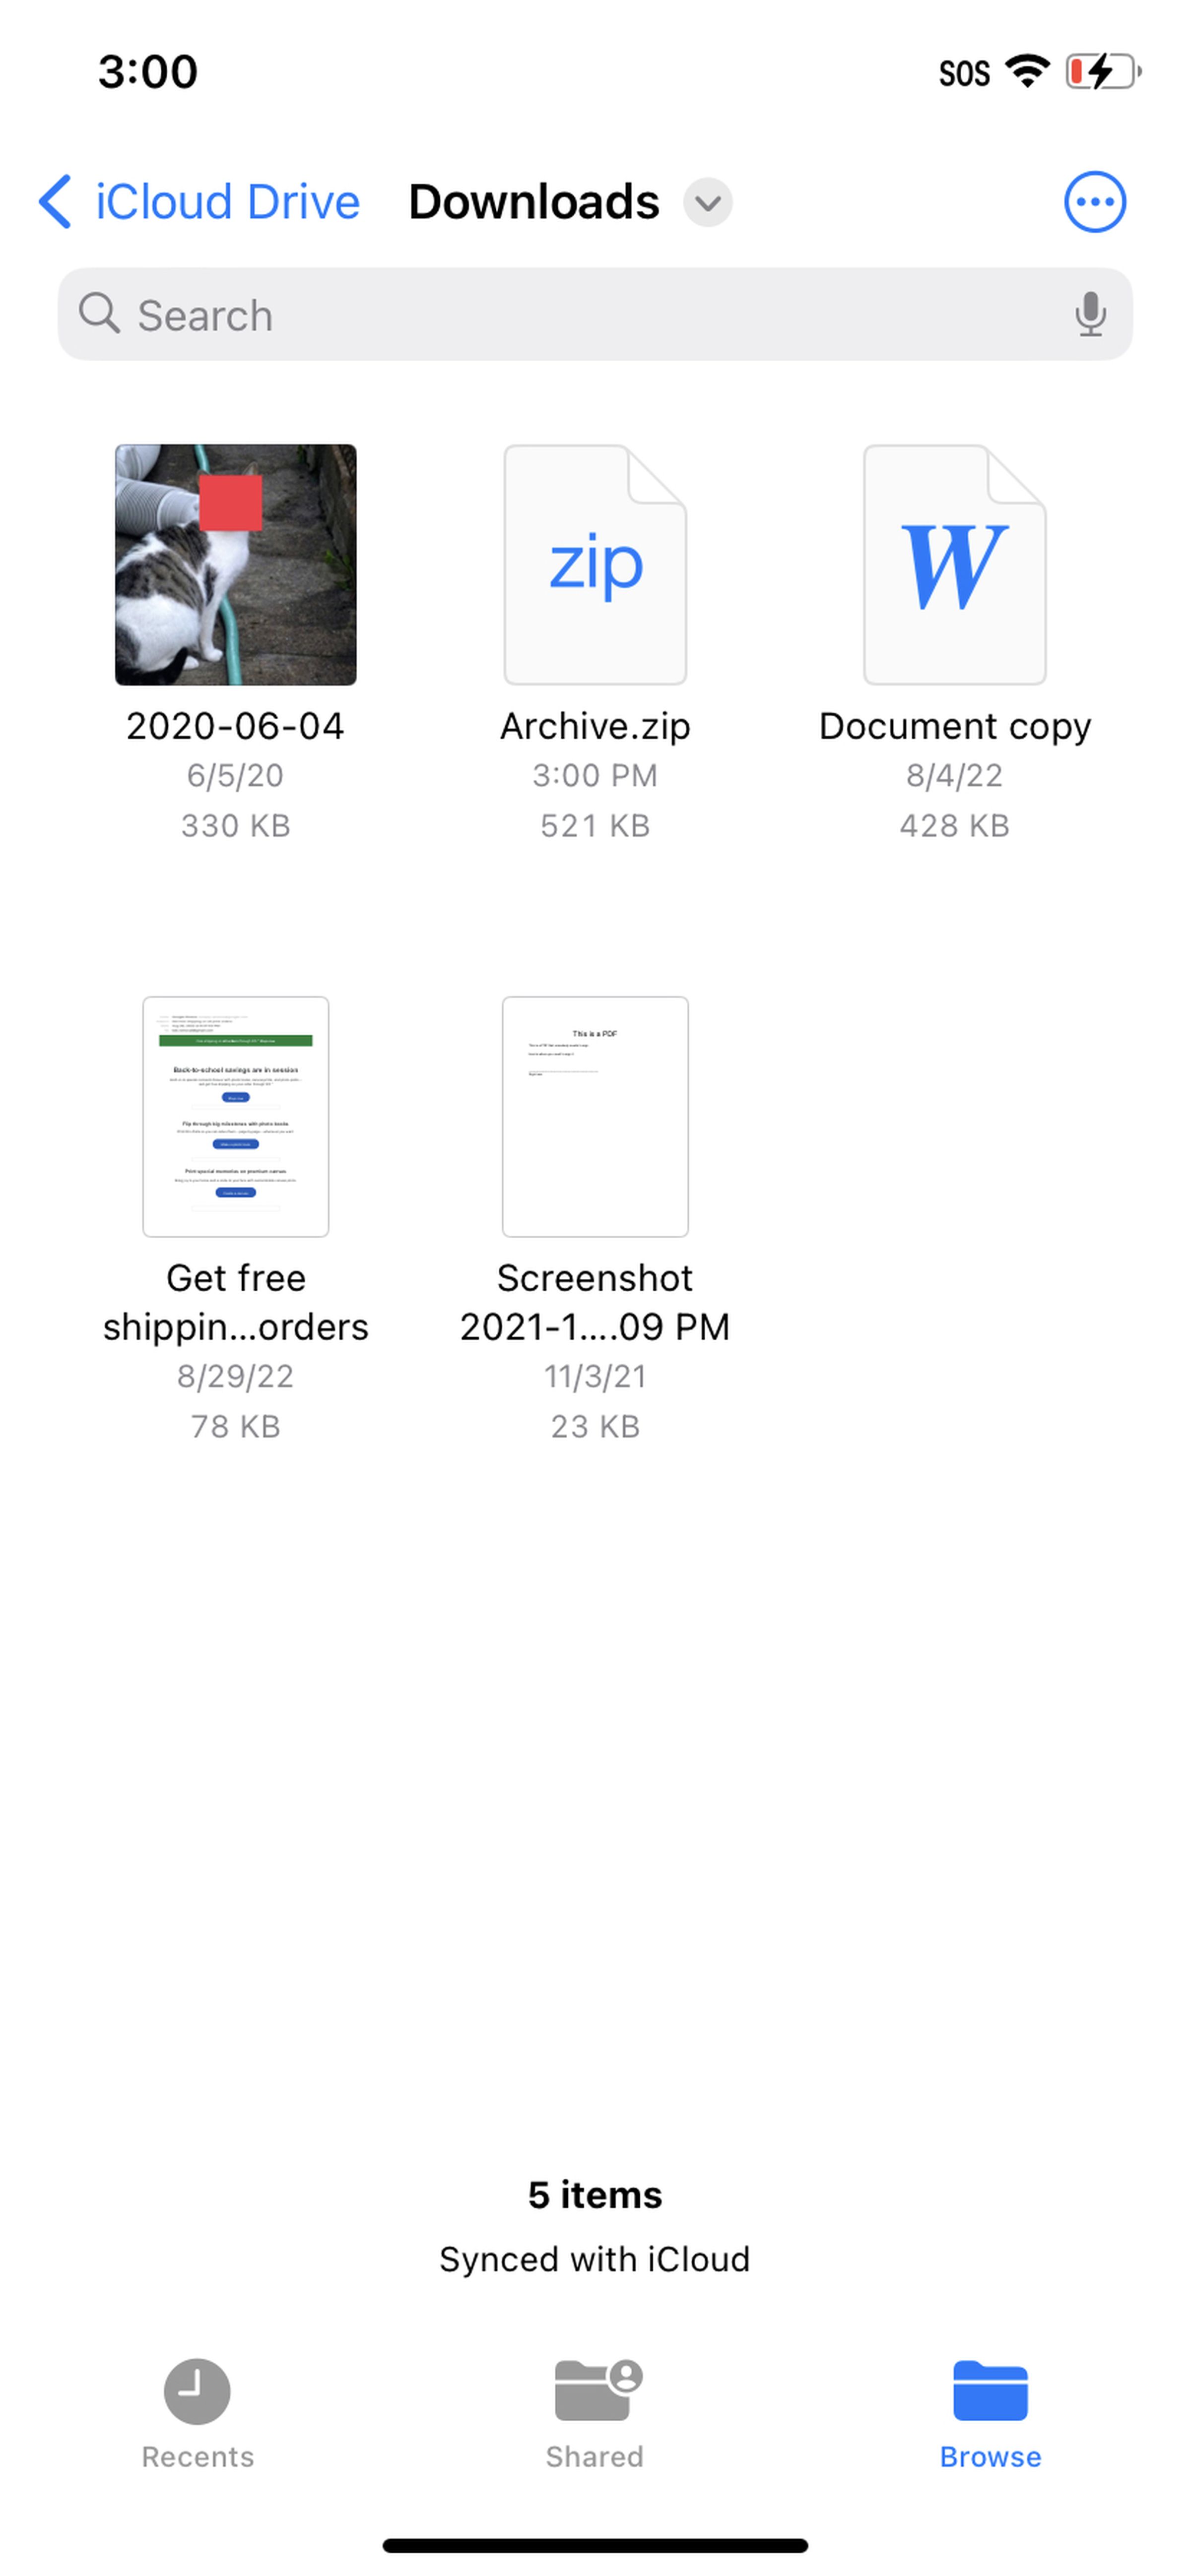 The same four files as before, with one more labeled Archive.zip.